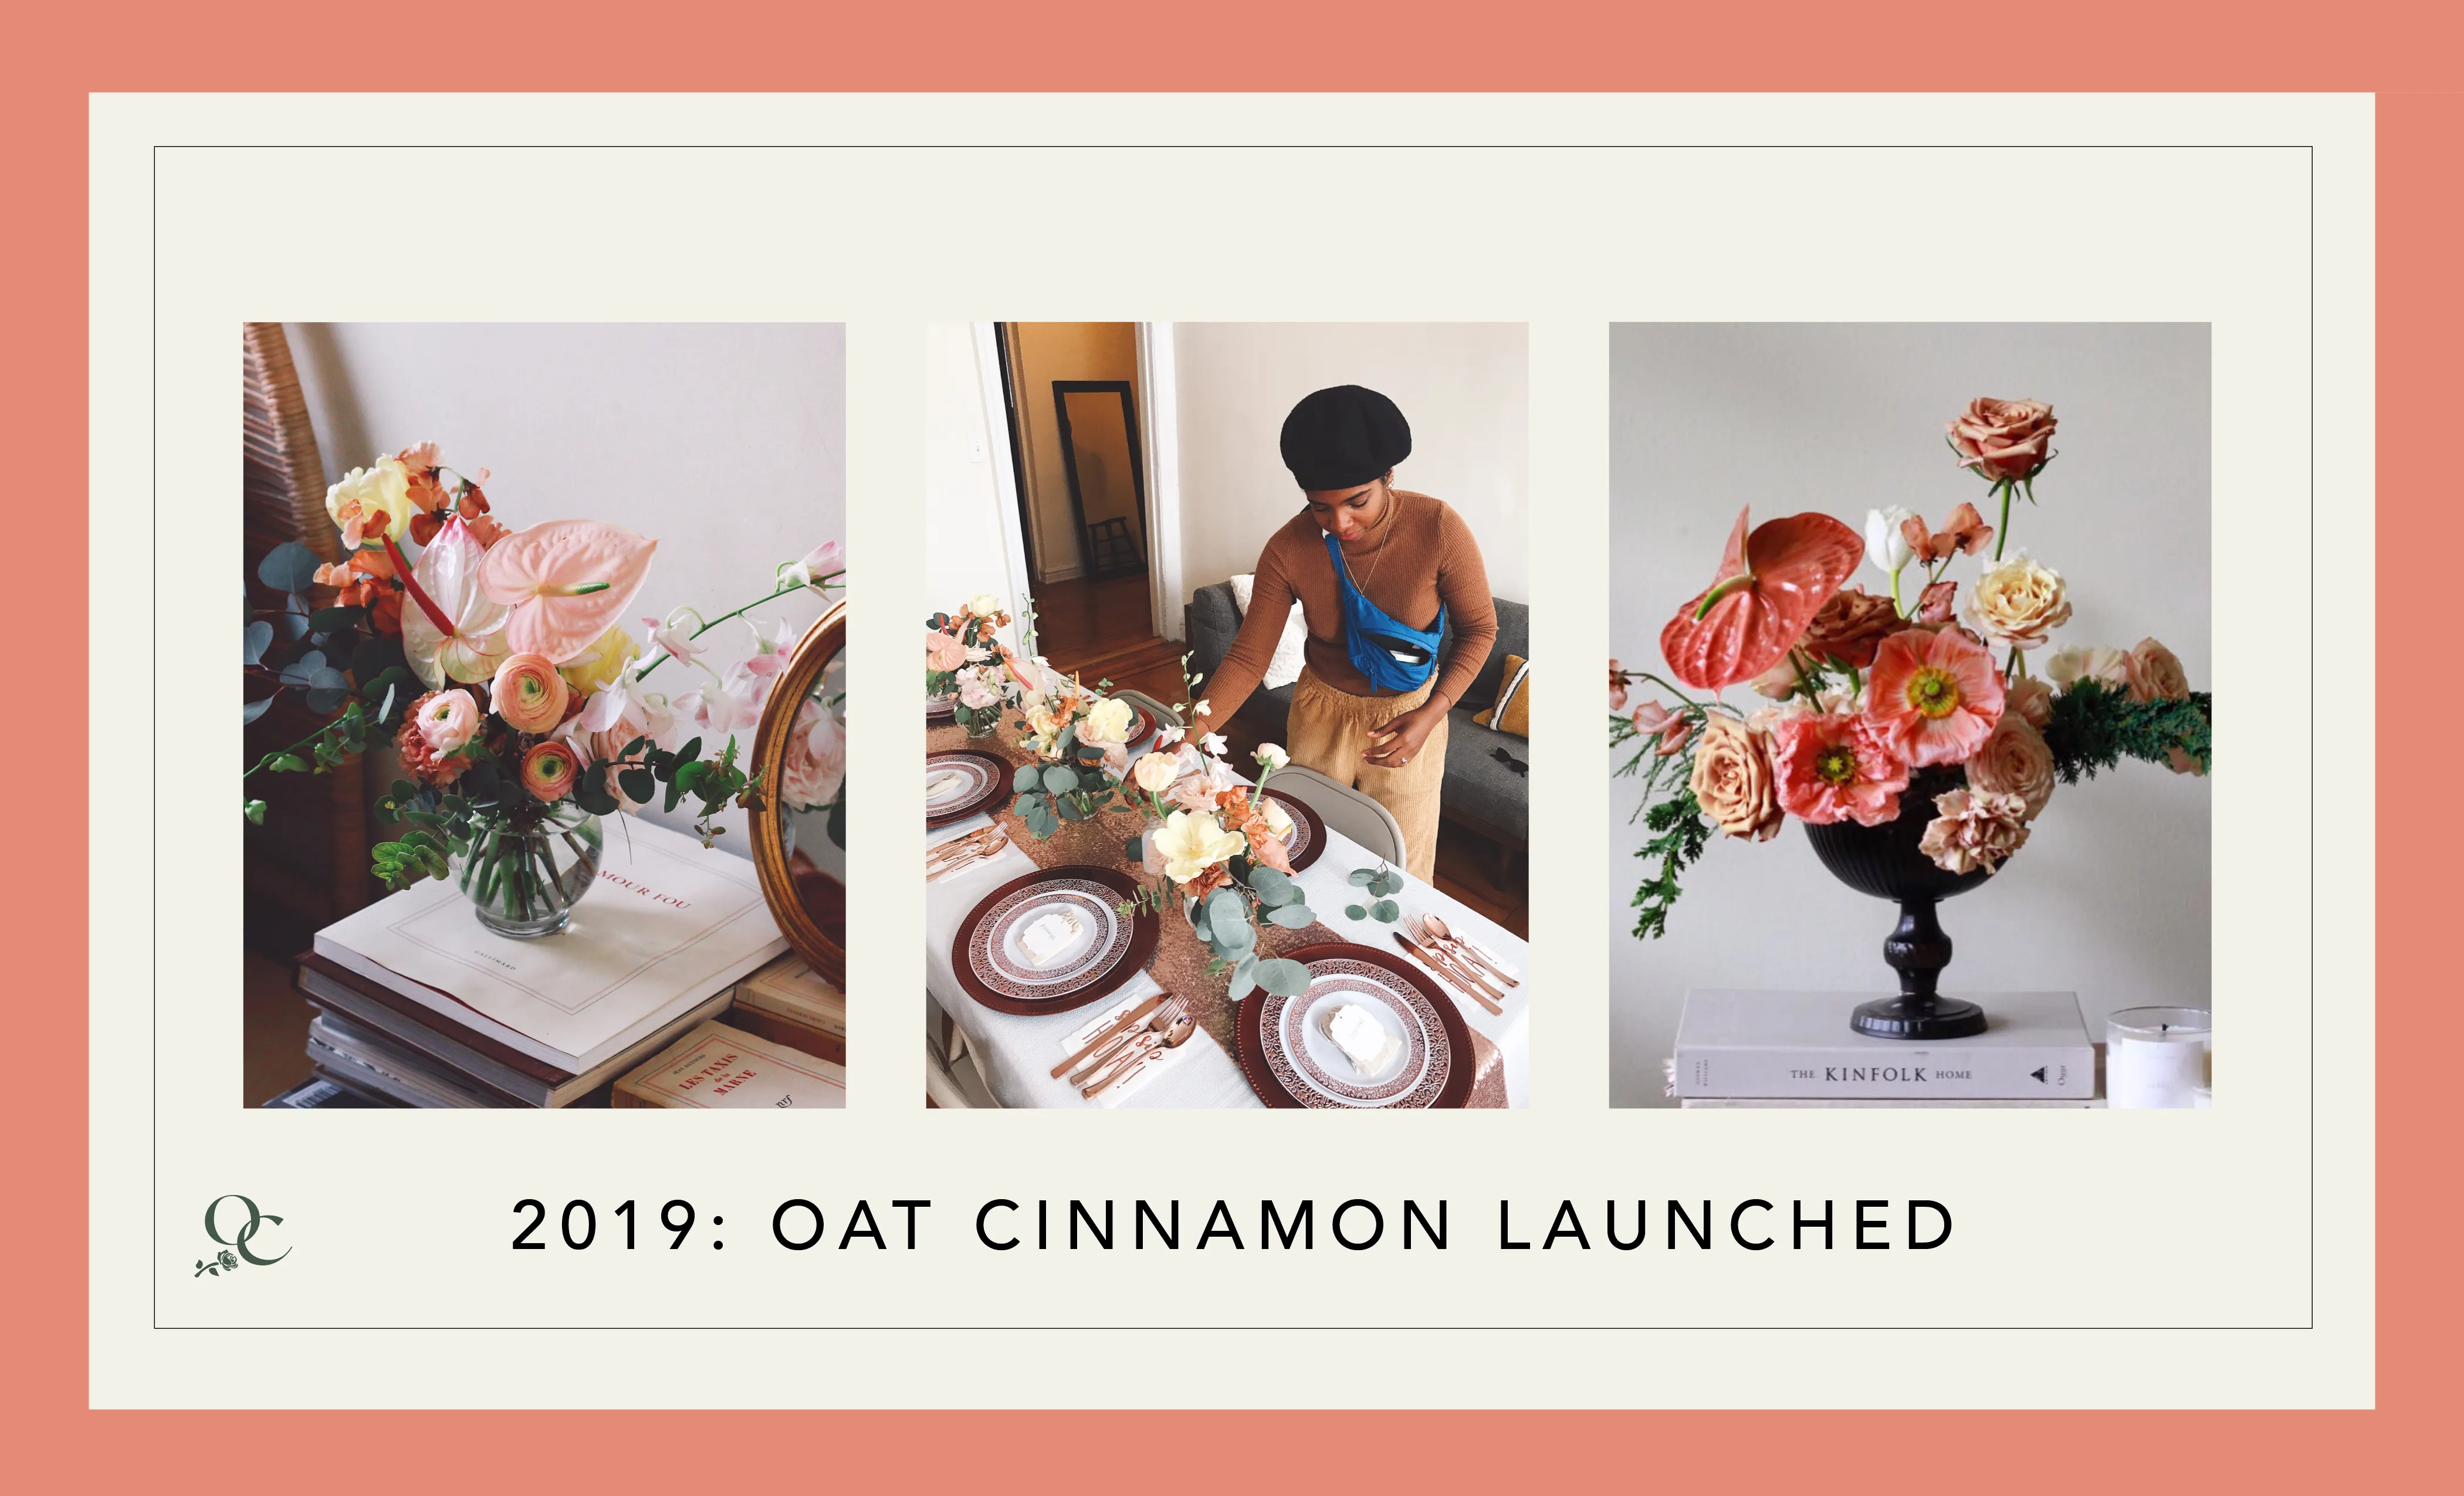 2019: OAT CINNAMON LAUNCHED